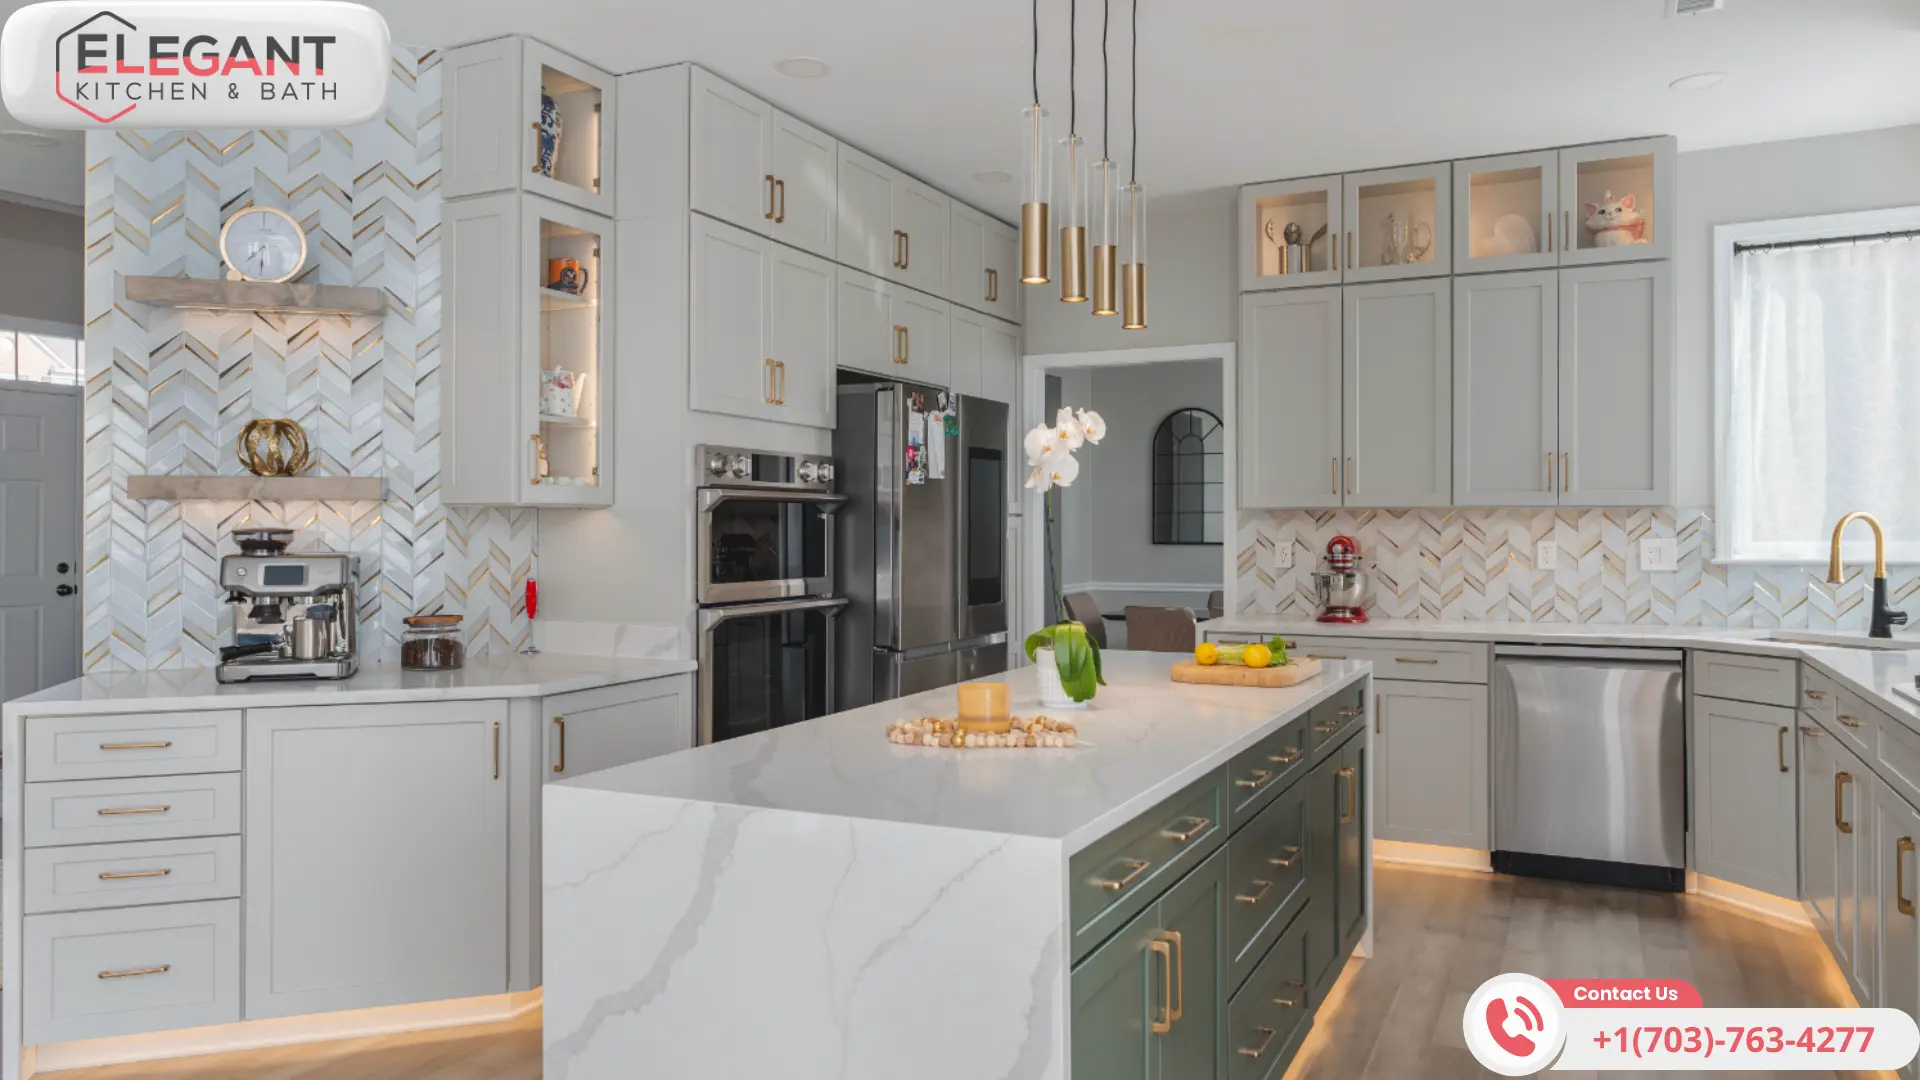 Backsplash-Tile-Kitchen-Remodeling-with_Elegant-Kitchen-and-Bath-Herndon-Virginia with Design Considerations: Which Pattern for Your Kitchen?